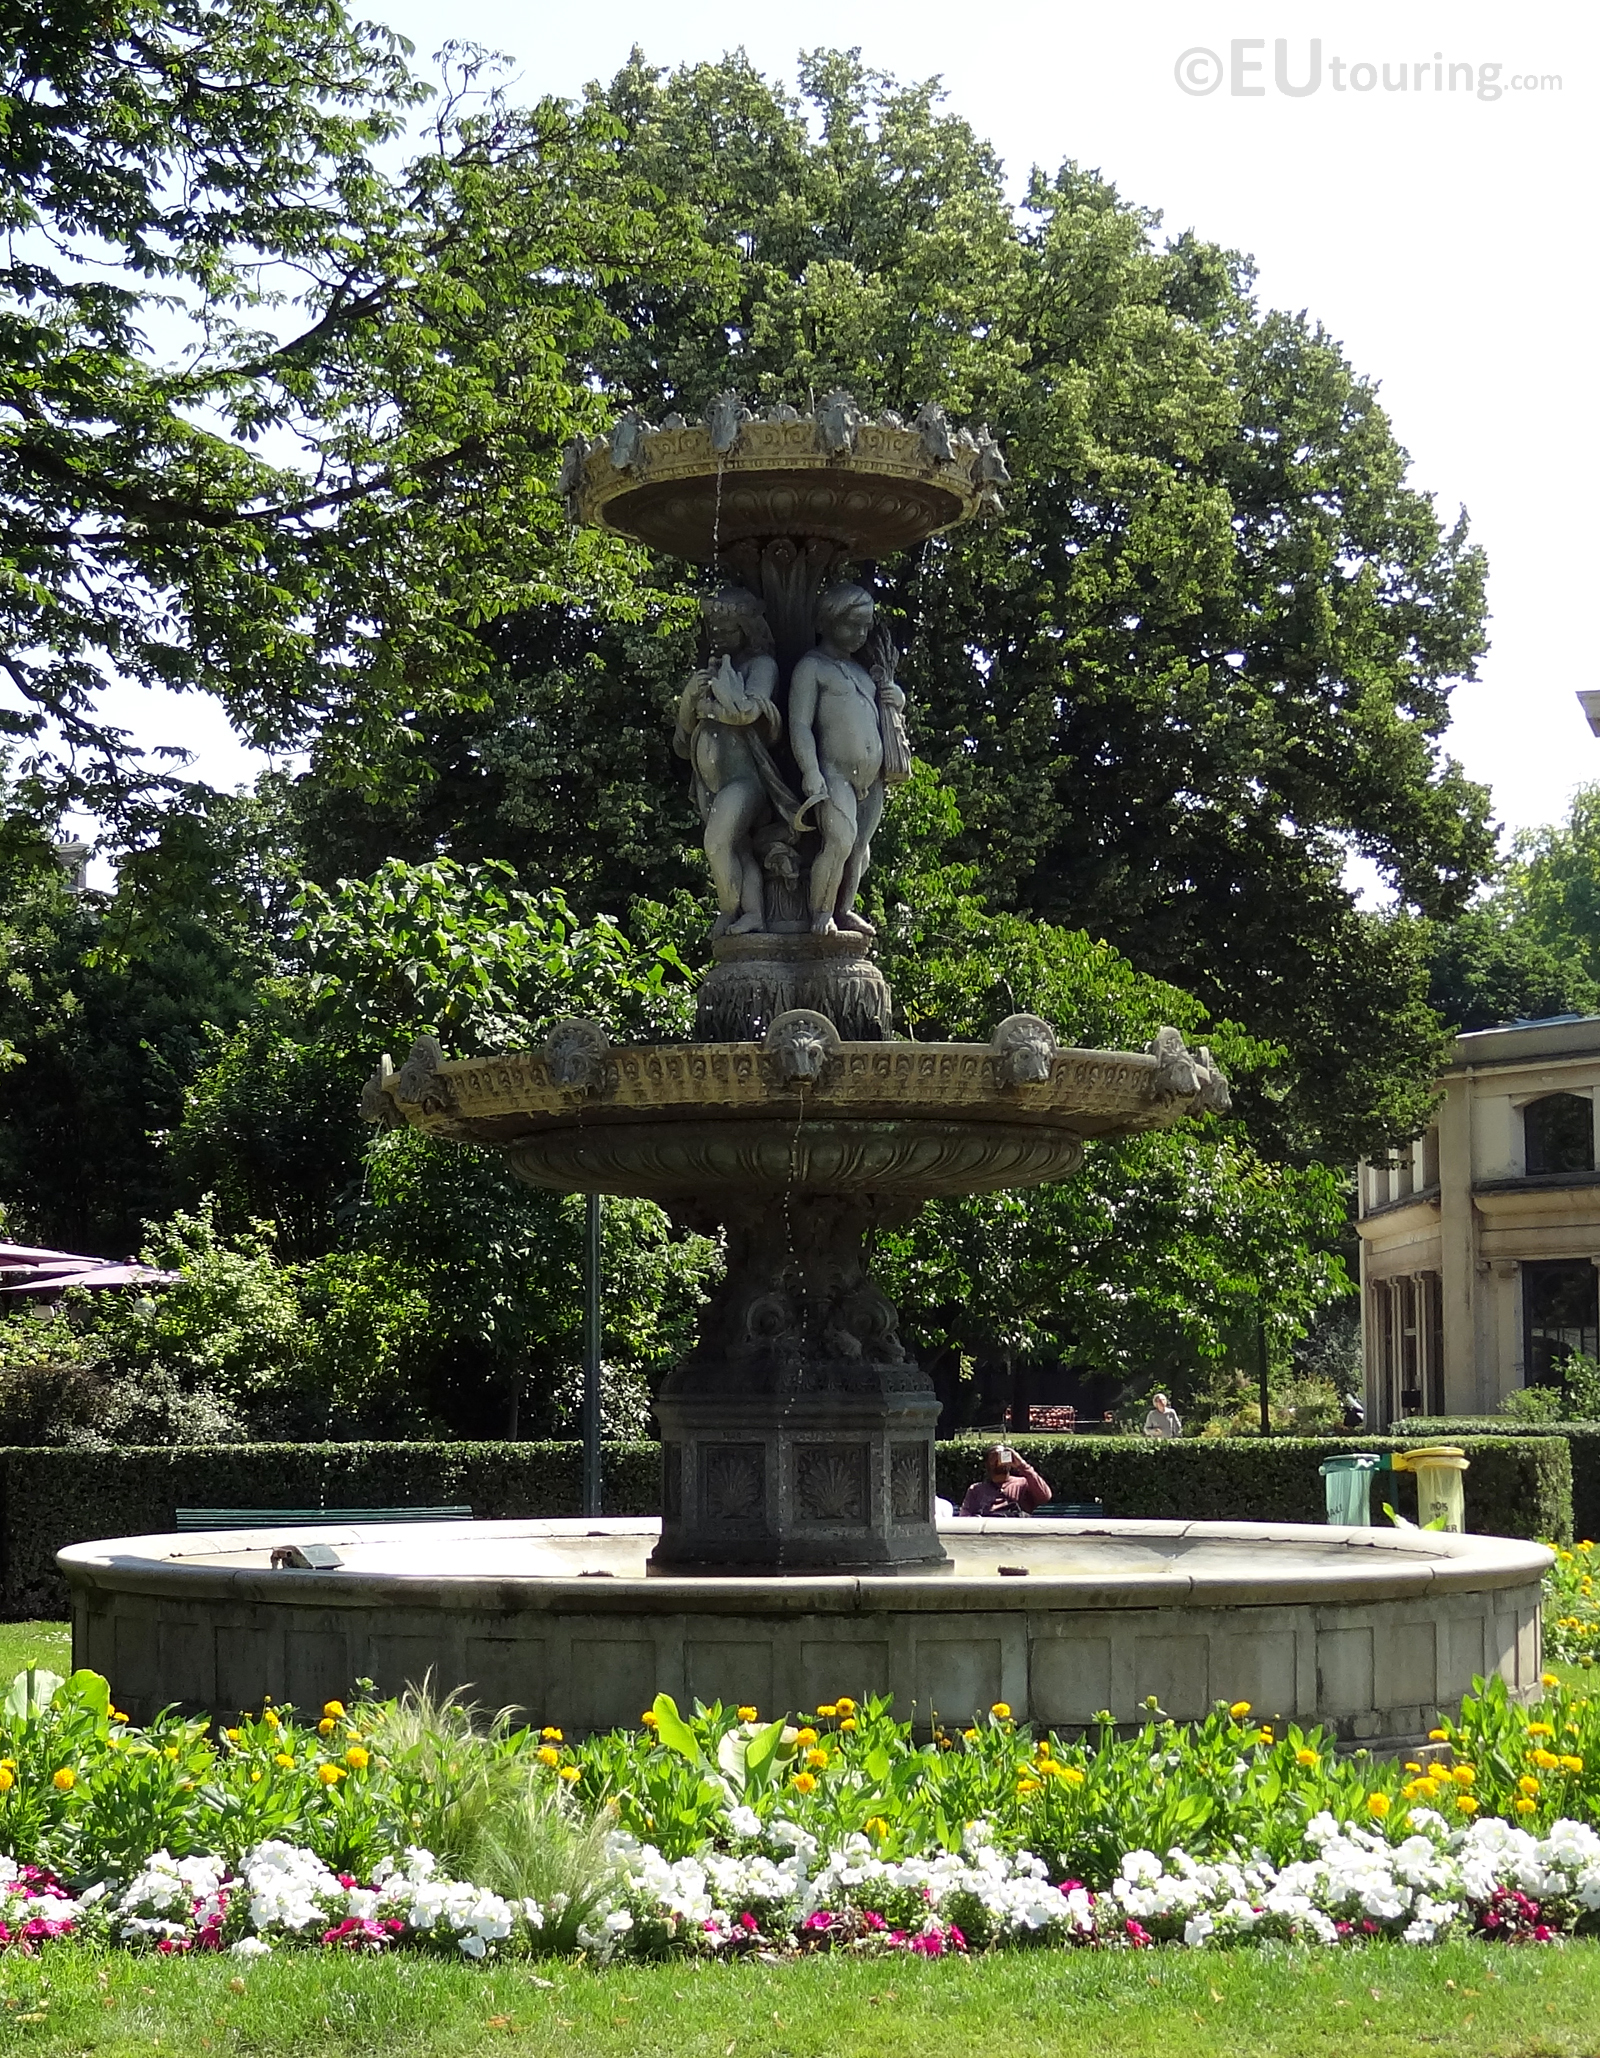 Close up of the fountain within the gardens